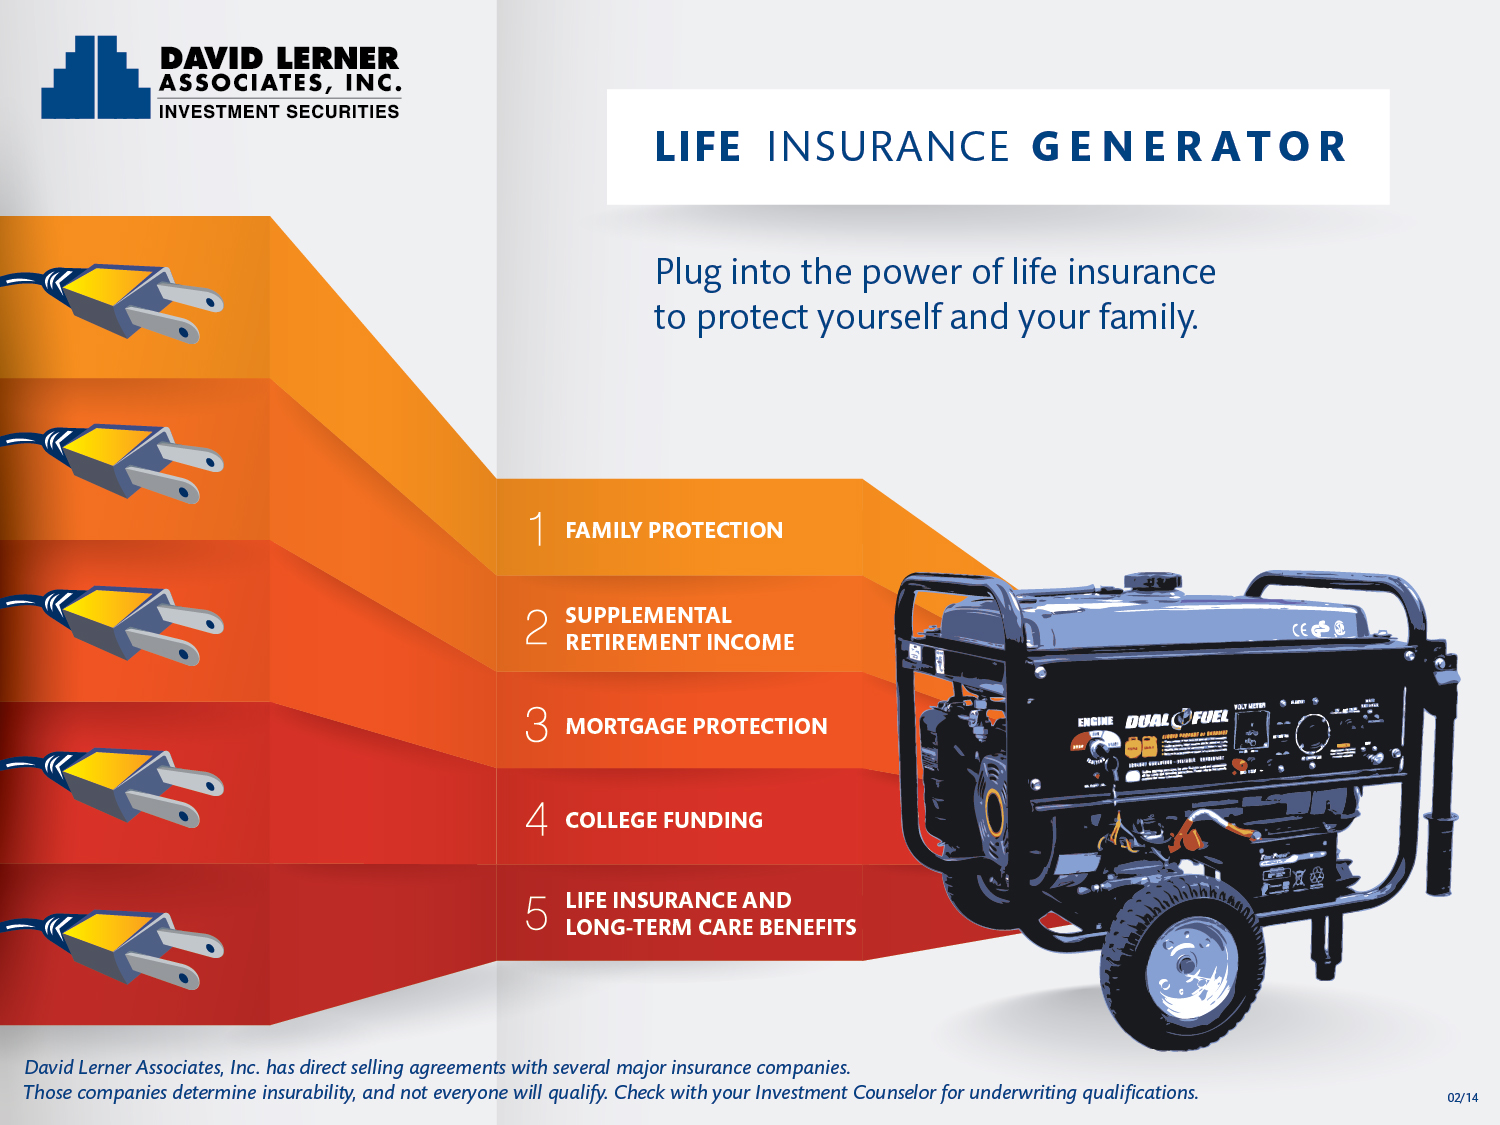 Five Ways to Power Up a Life Insurance Generator